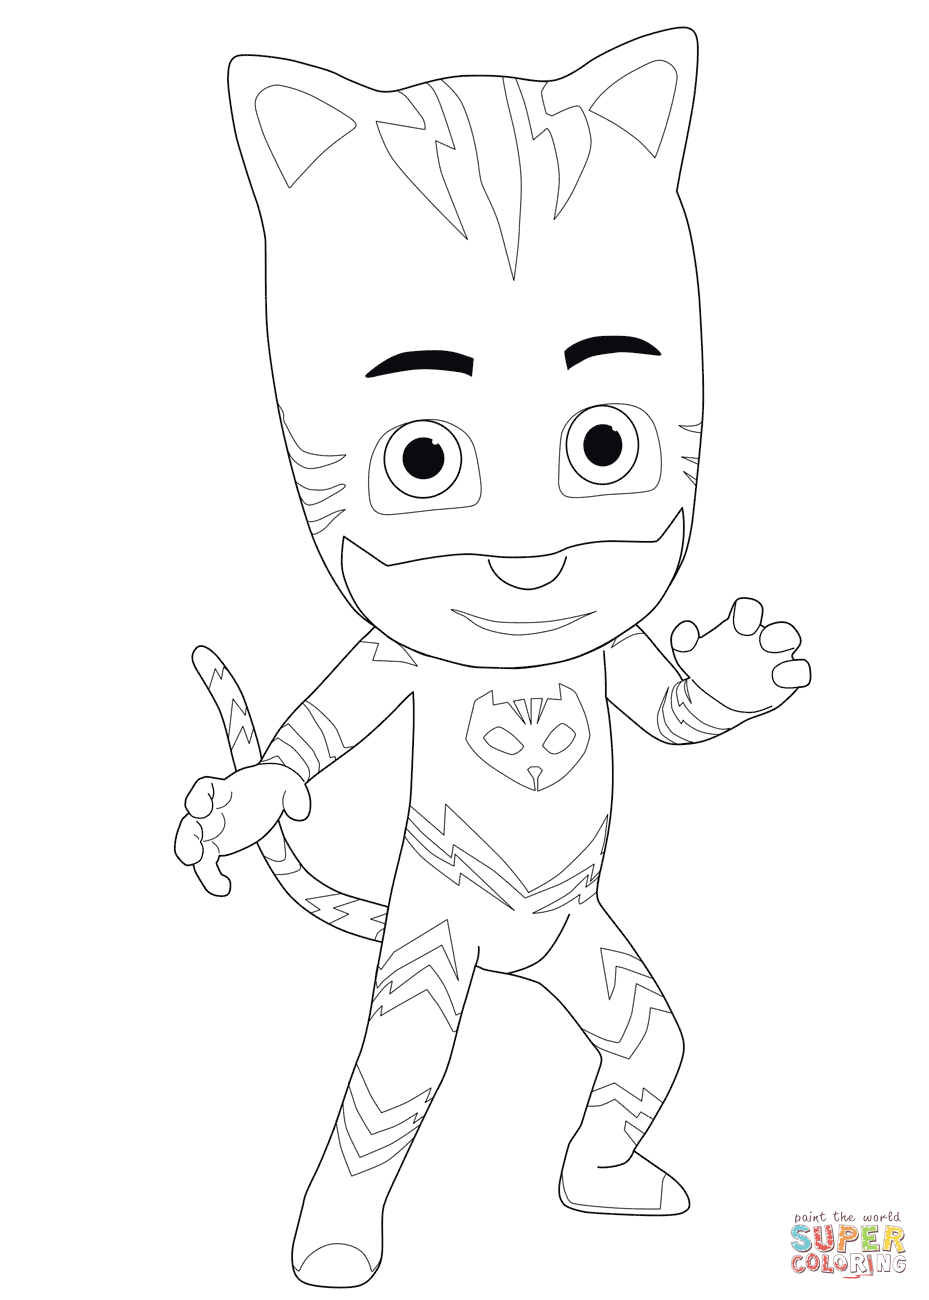 Catboy from pj masks coloring page free printable coloring pages